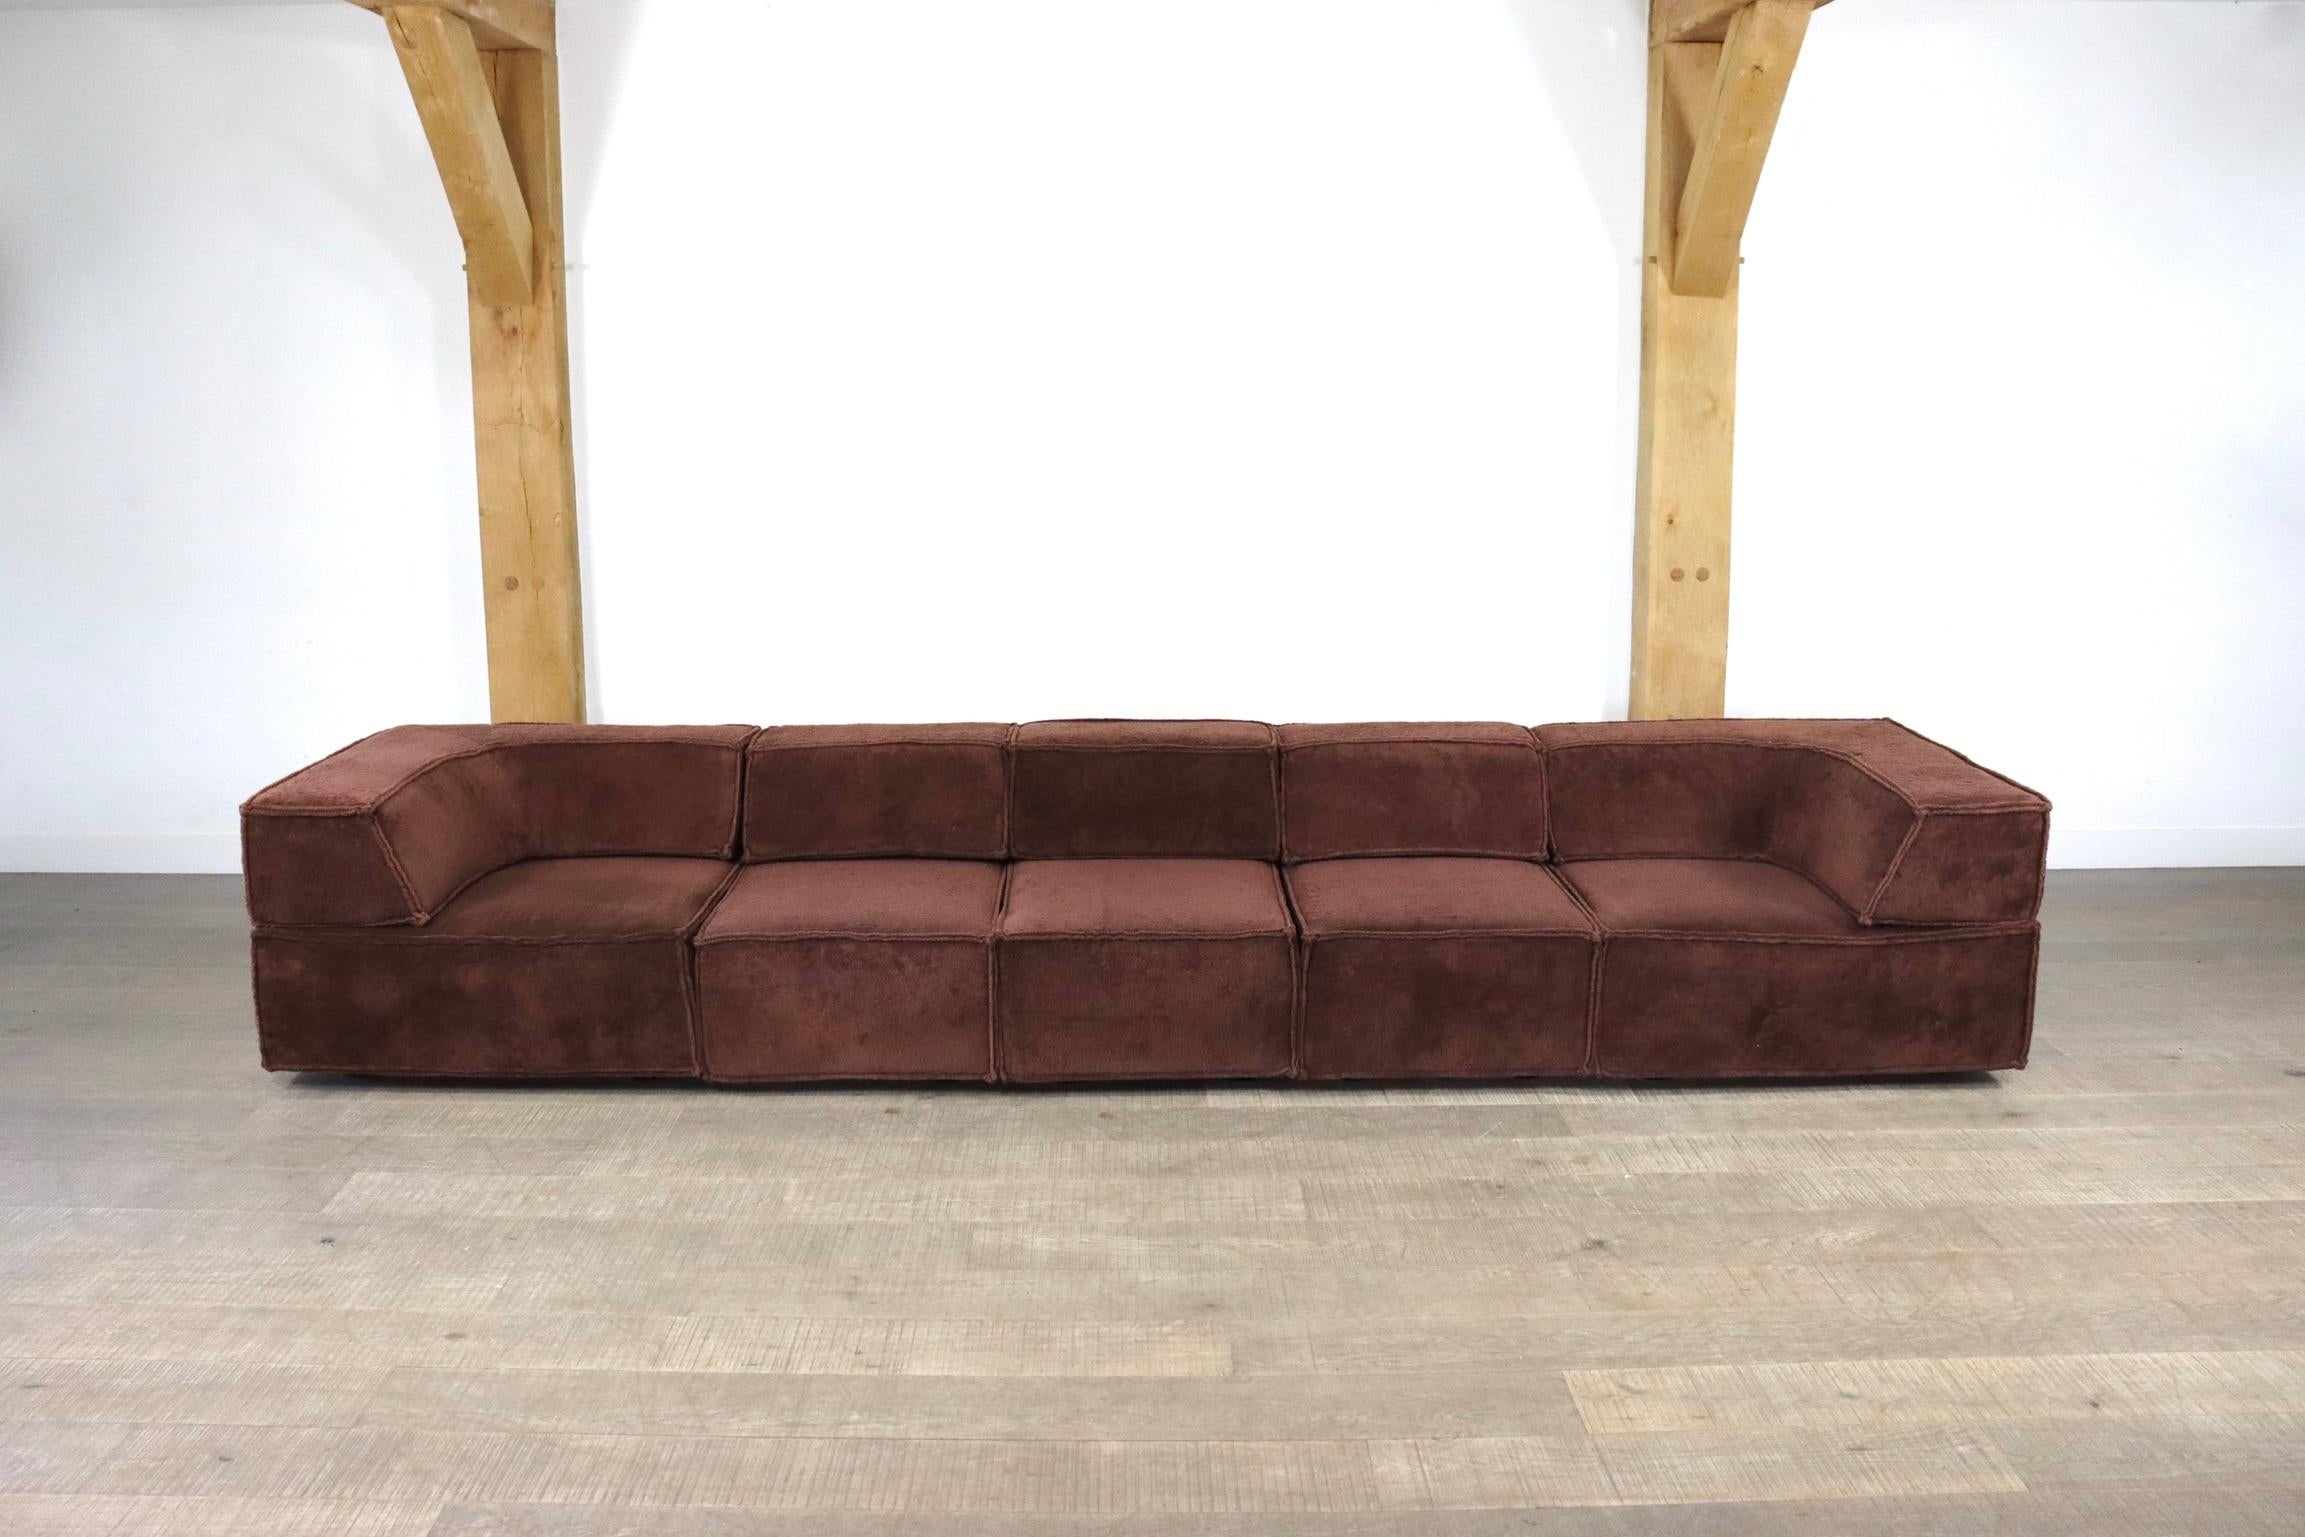 This modular sofa system in stunning brown teddy fabric, which was created in 1972 by Team Form AG in Switzerland for COR, blends seamlessly into any environment. Taking the backrest away it can also be used as a very comfortable bed, and the